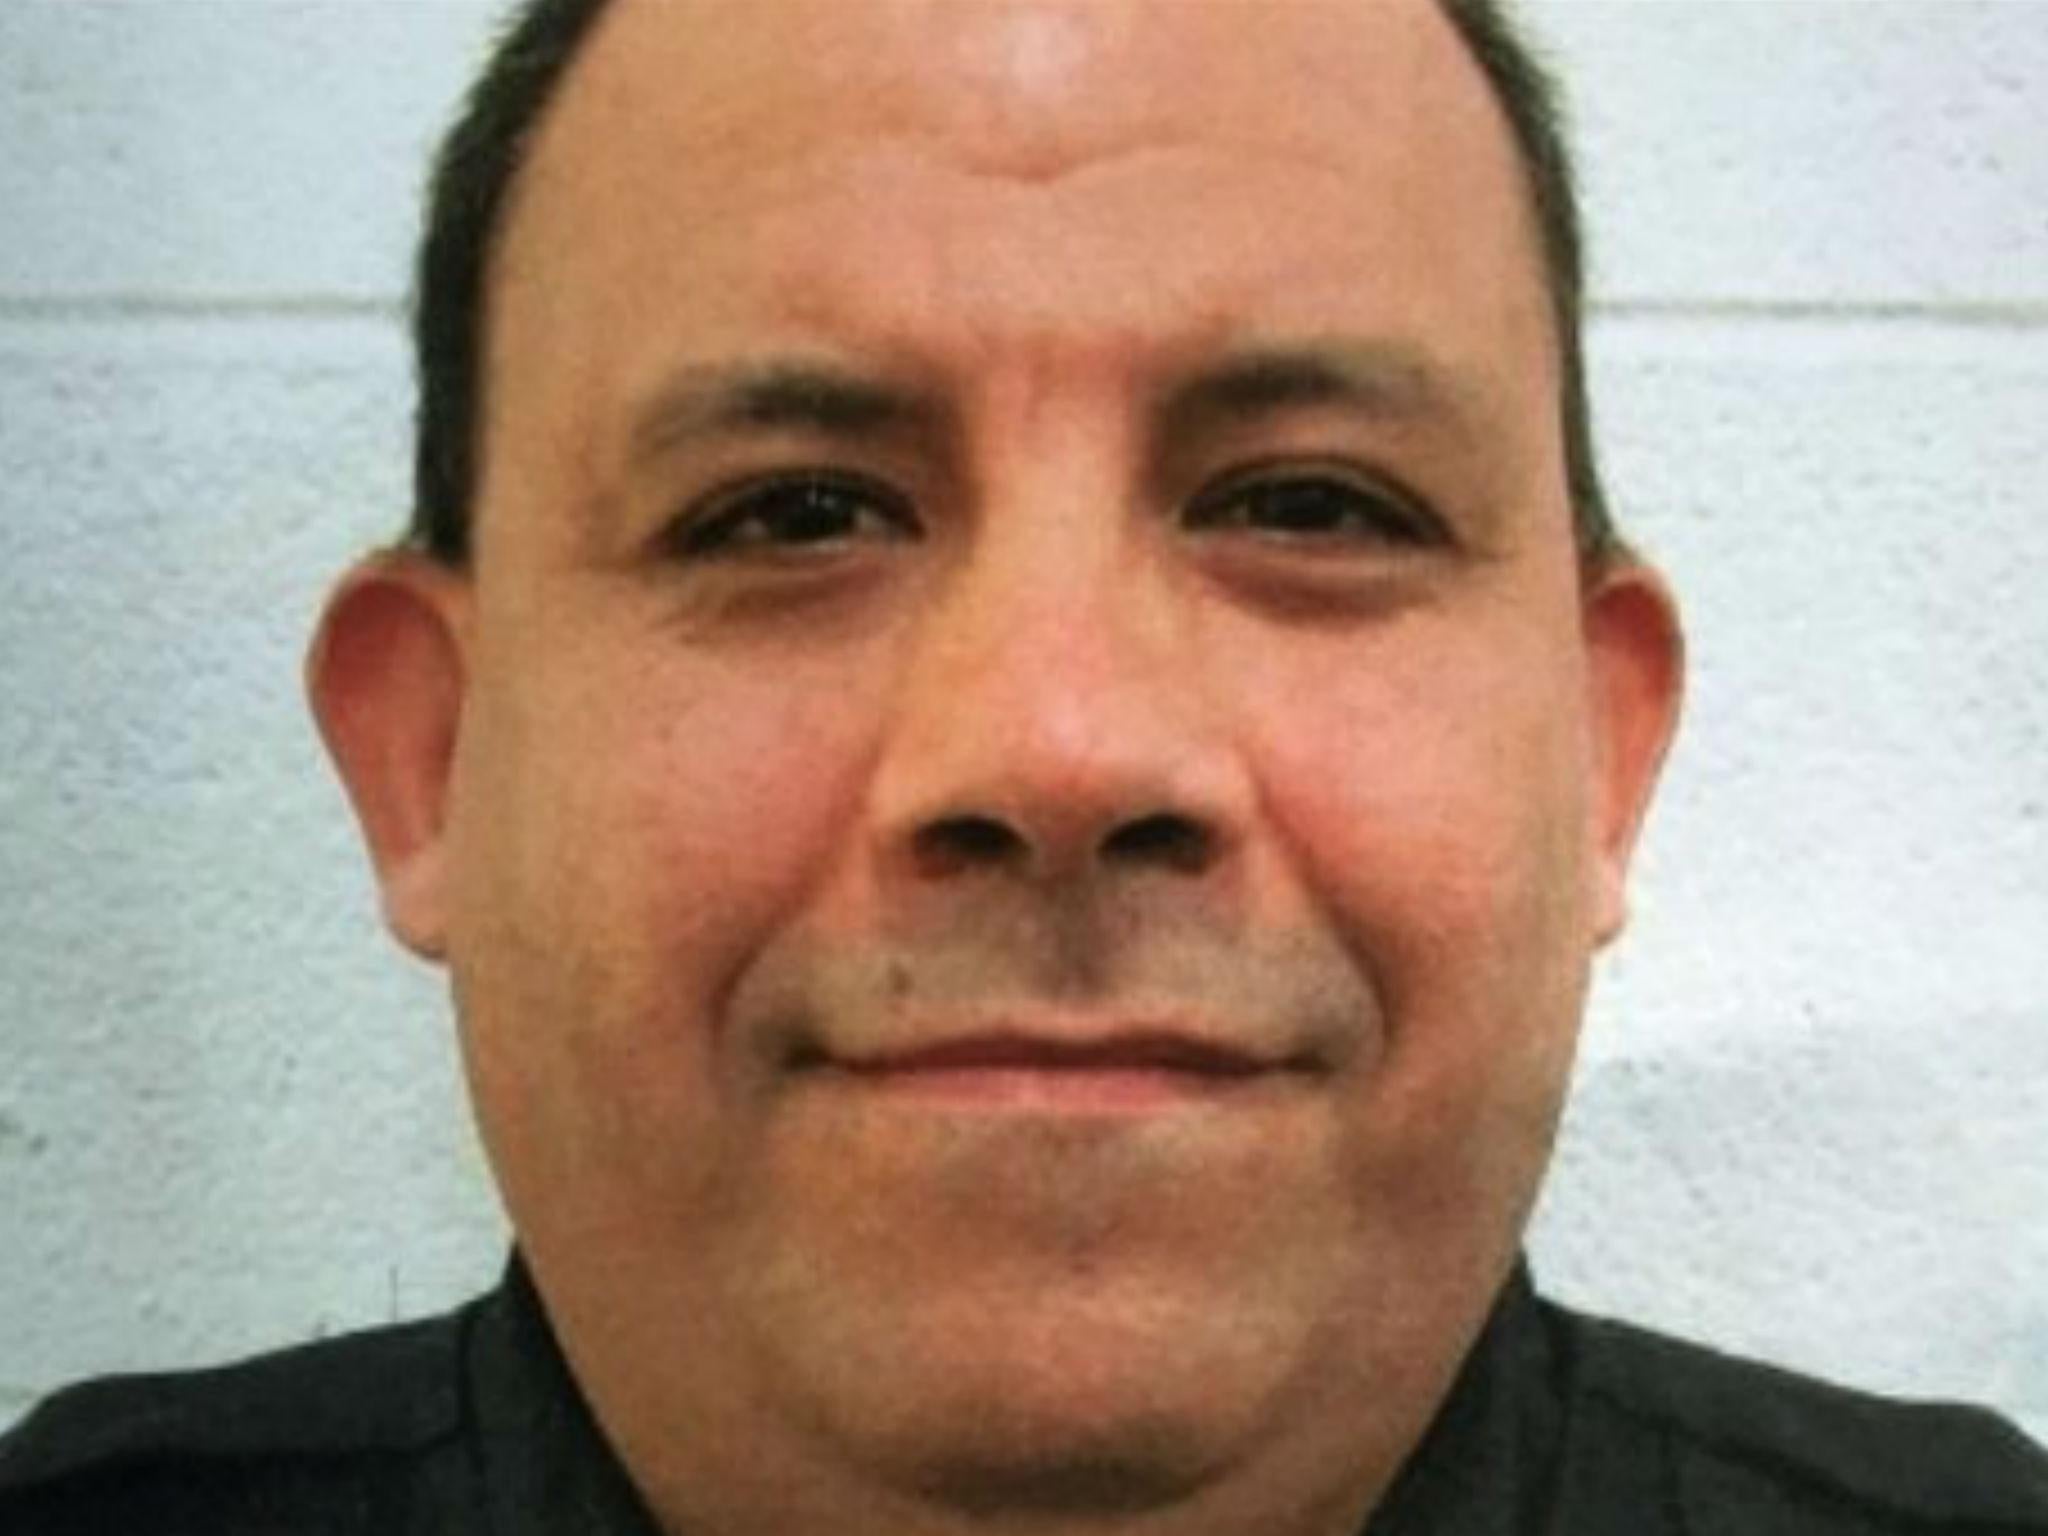 Mr Nunez has been charged and faces charges that carry a minimum of 25 years in prison